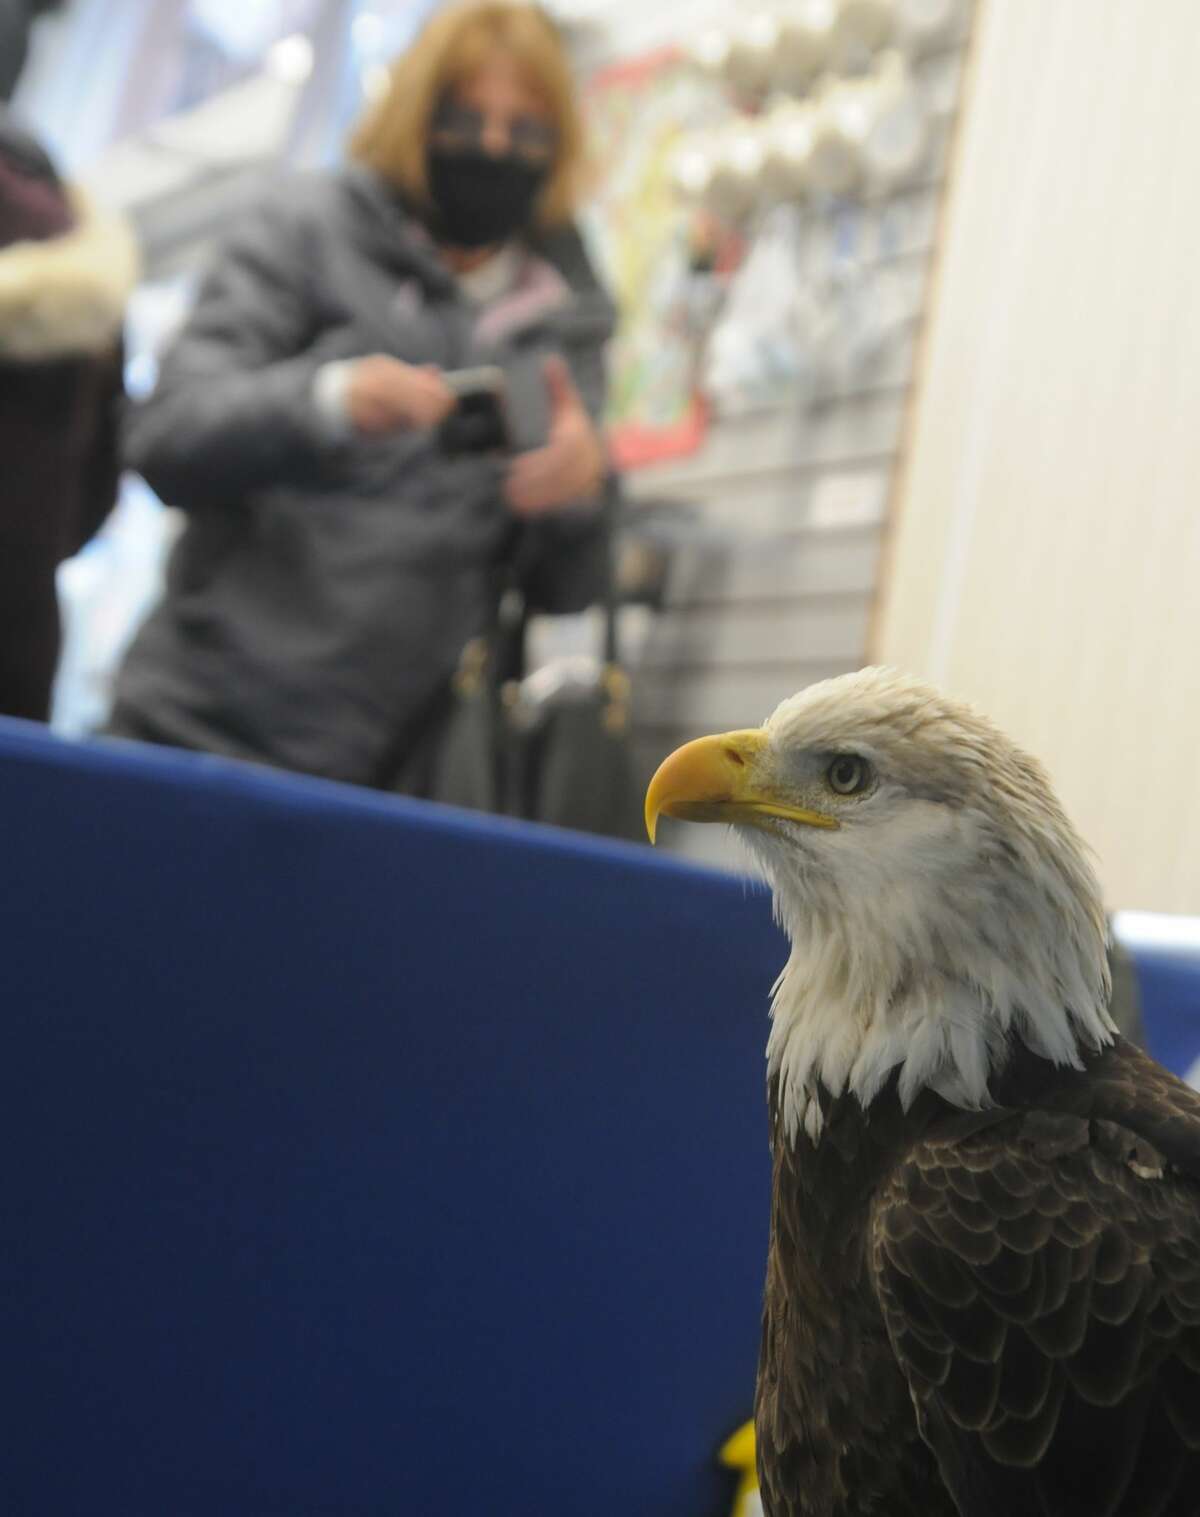 Liberty the bald eagle poses for photos inside the Alton Visitors Center during the Eagle Ice Festival on Saturday.